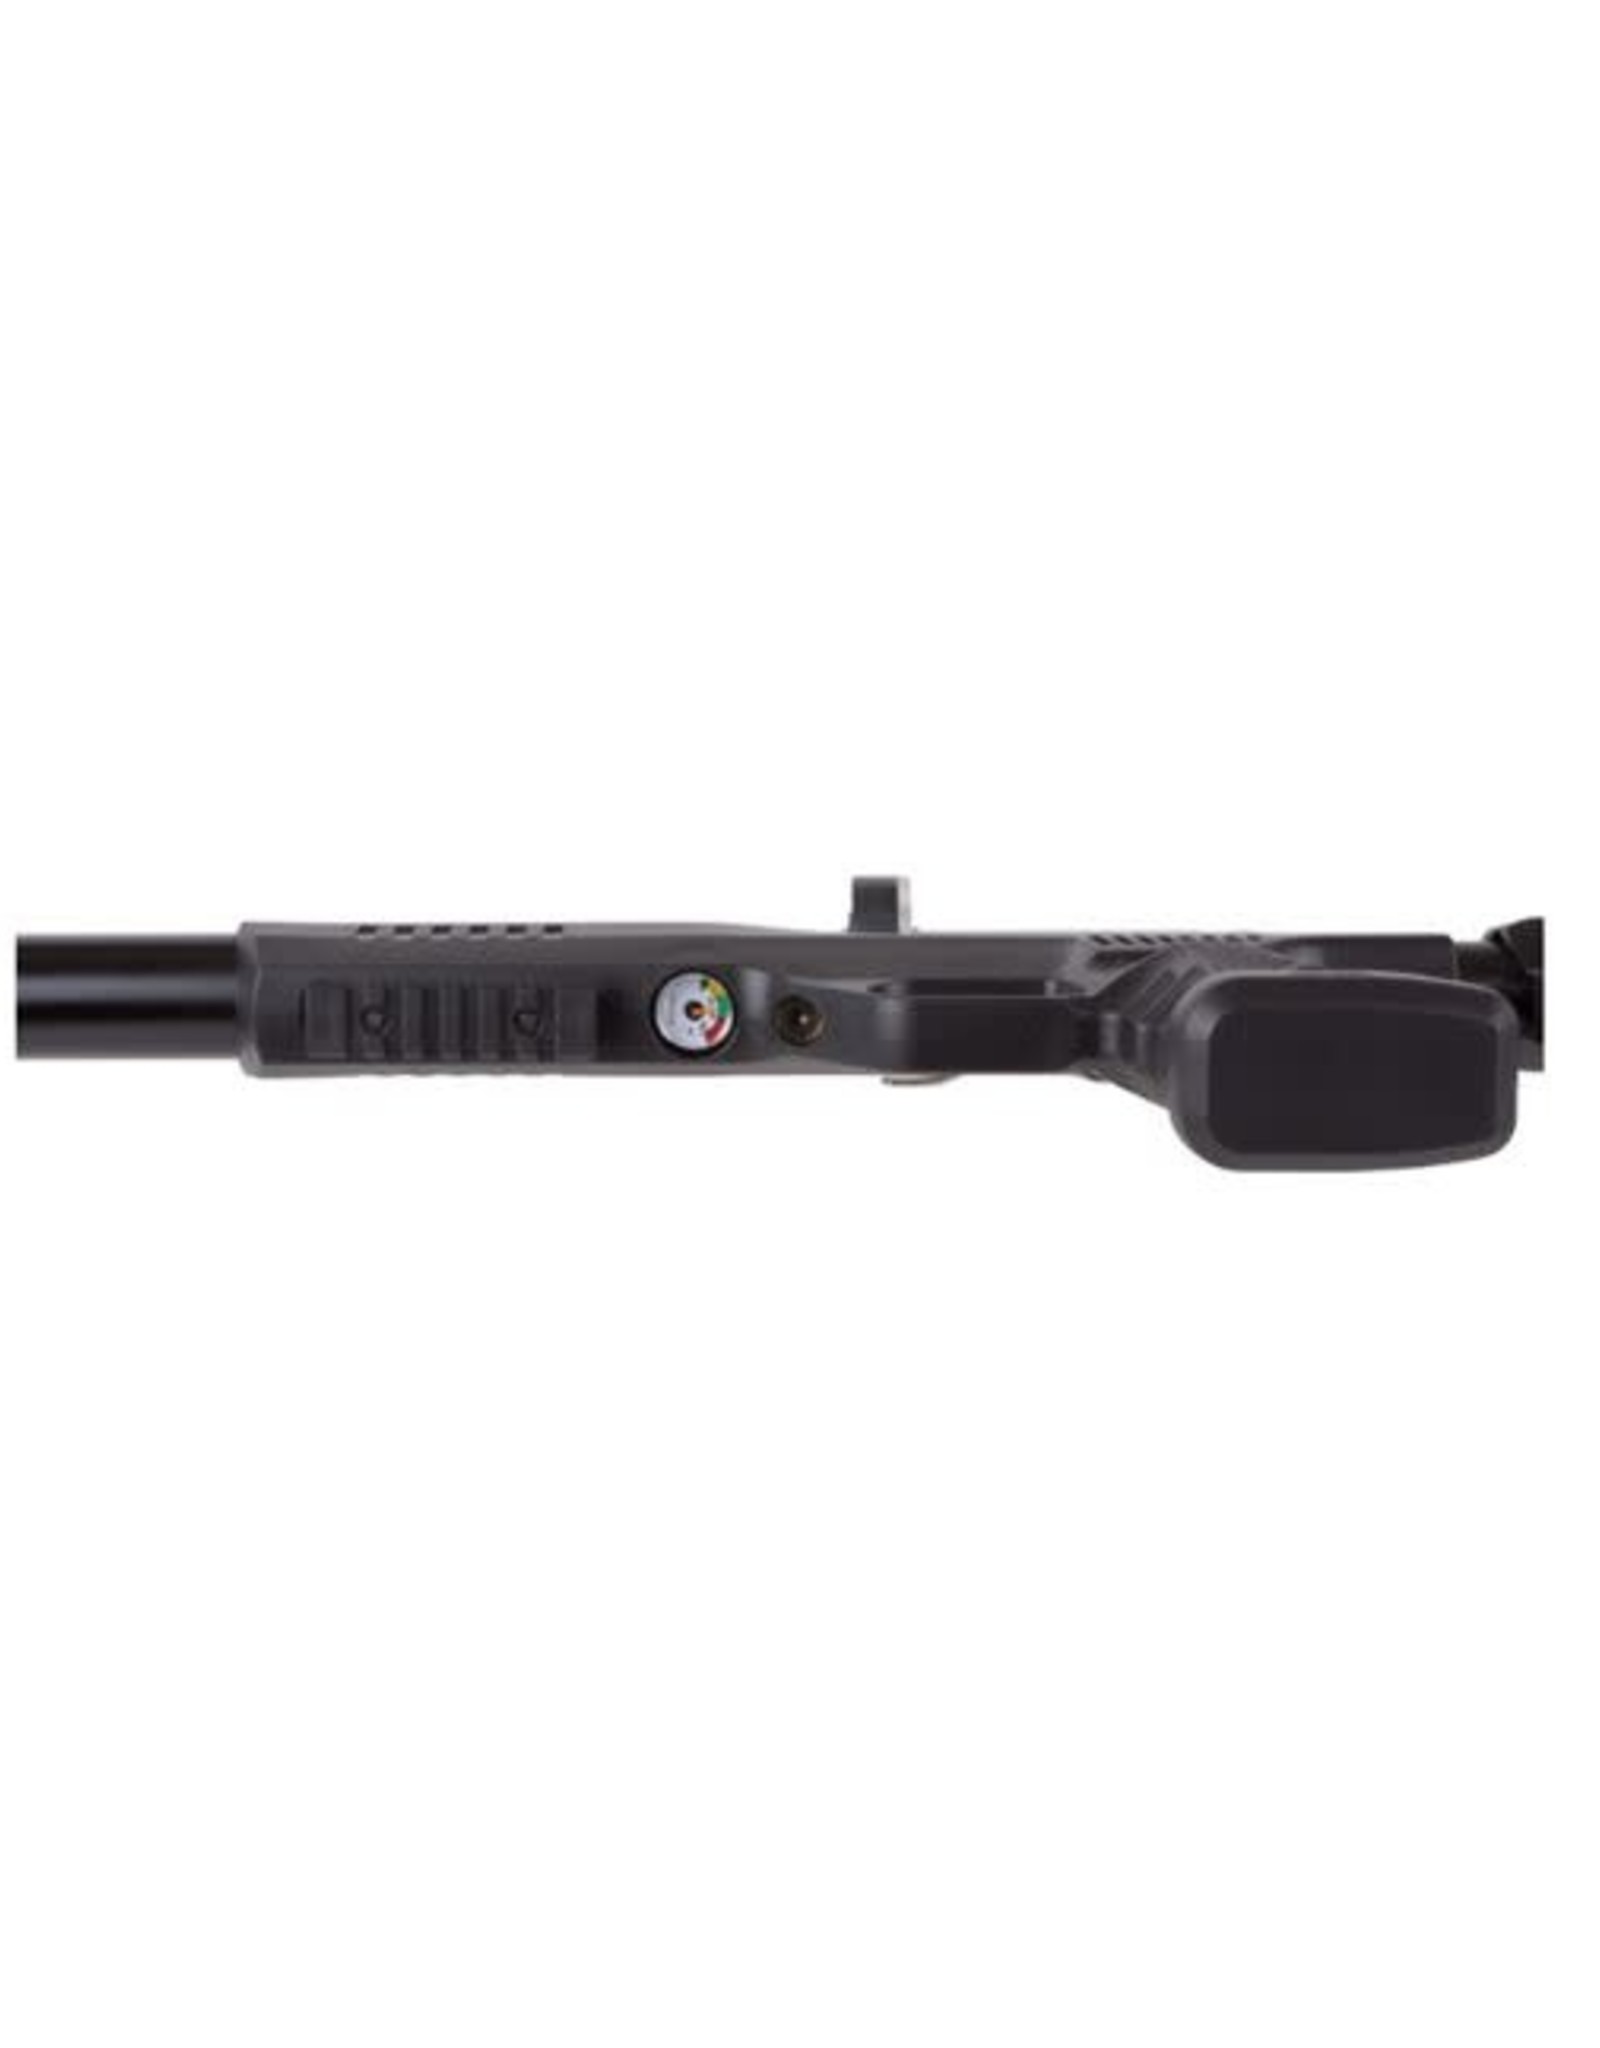 Kral Arms Kral Arms Puncher NP-03 PCP Air Carbine .22 Caliber (5.5mm) - Two 12 Round Magazines